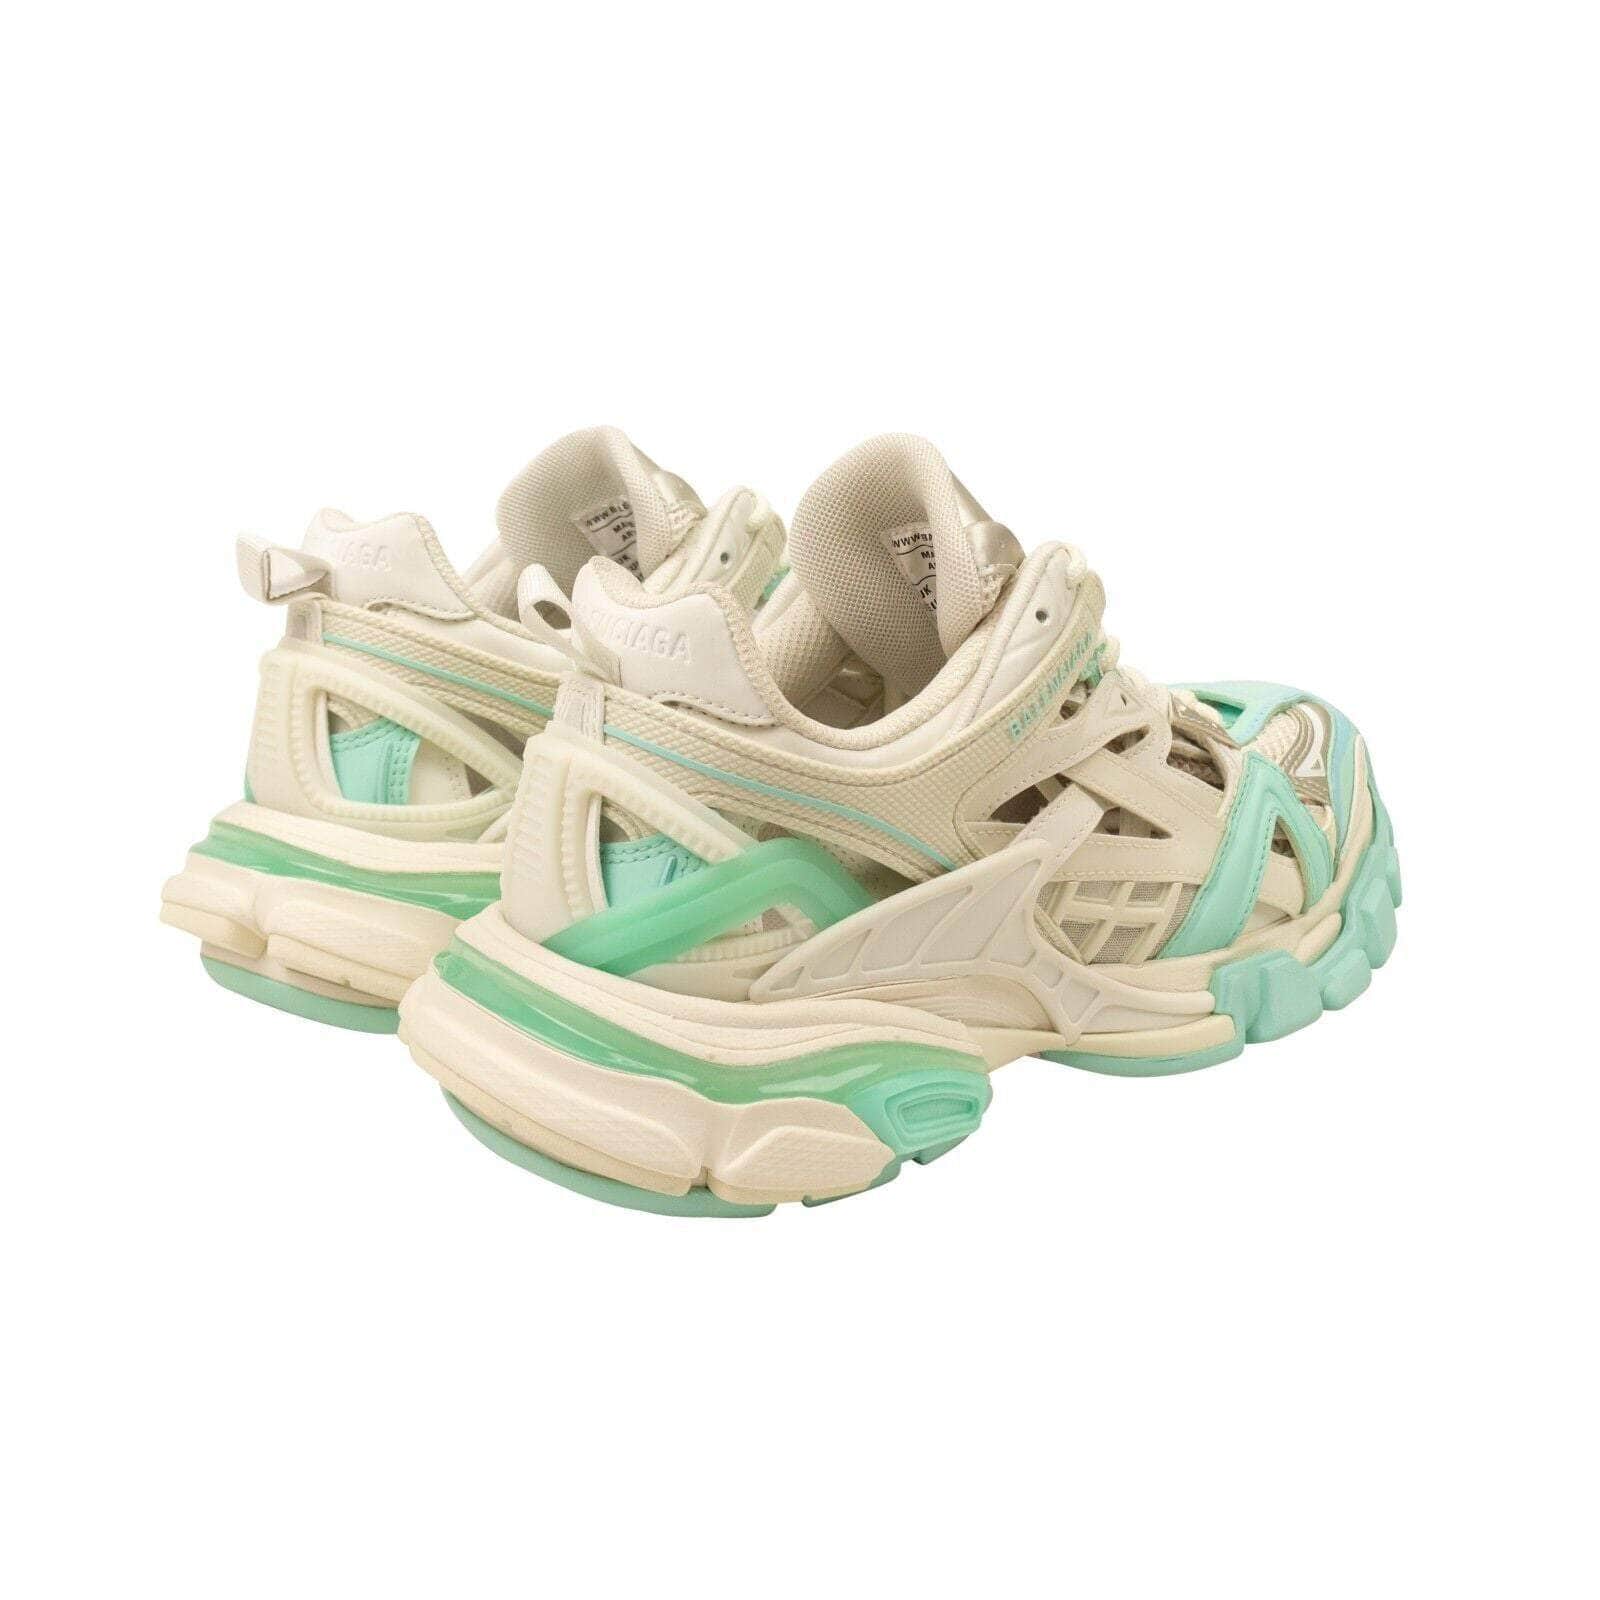 Balenciaga 1000-2000, balenciaga, channelenable-all, chicmi, couponcollection, gender-womens, main-shoes, size-36, size-38, size-39 White And Green Track 2 Sneakers